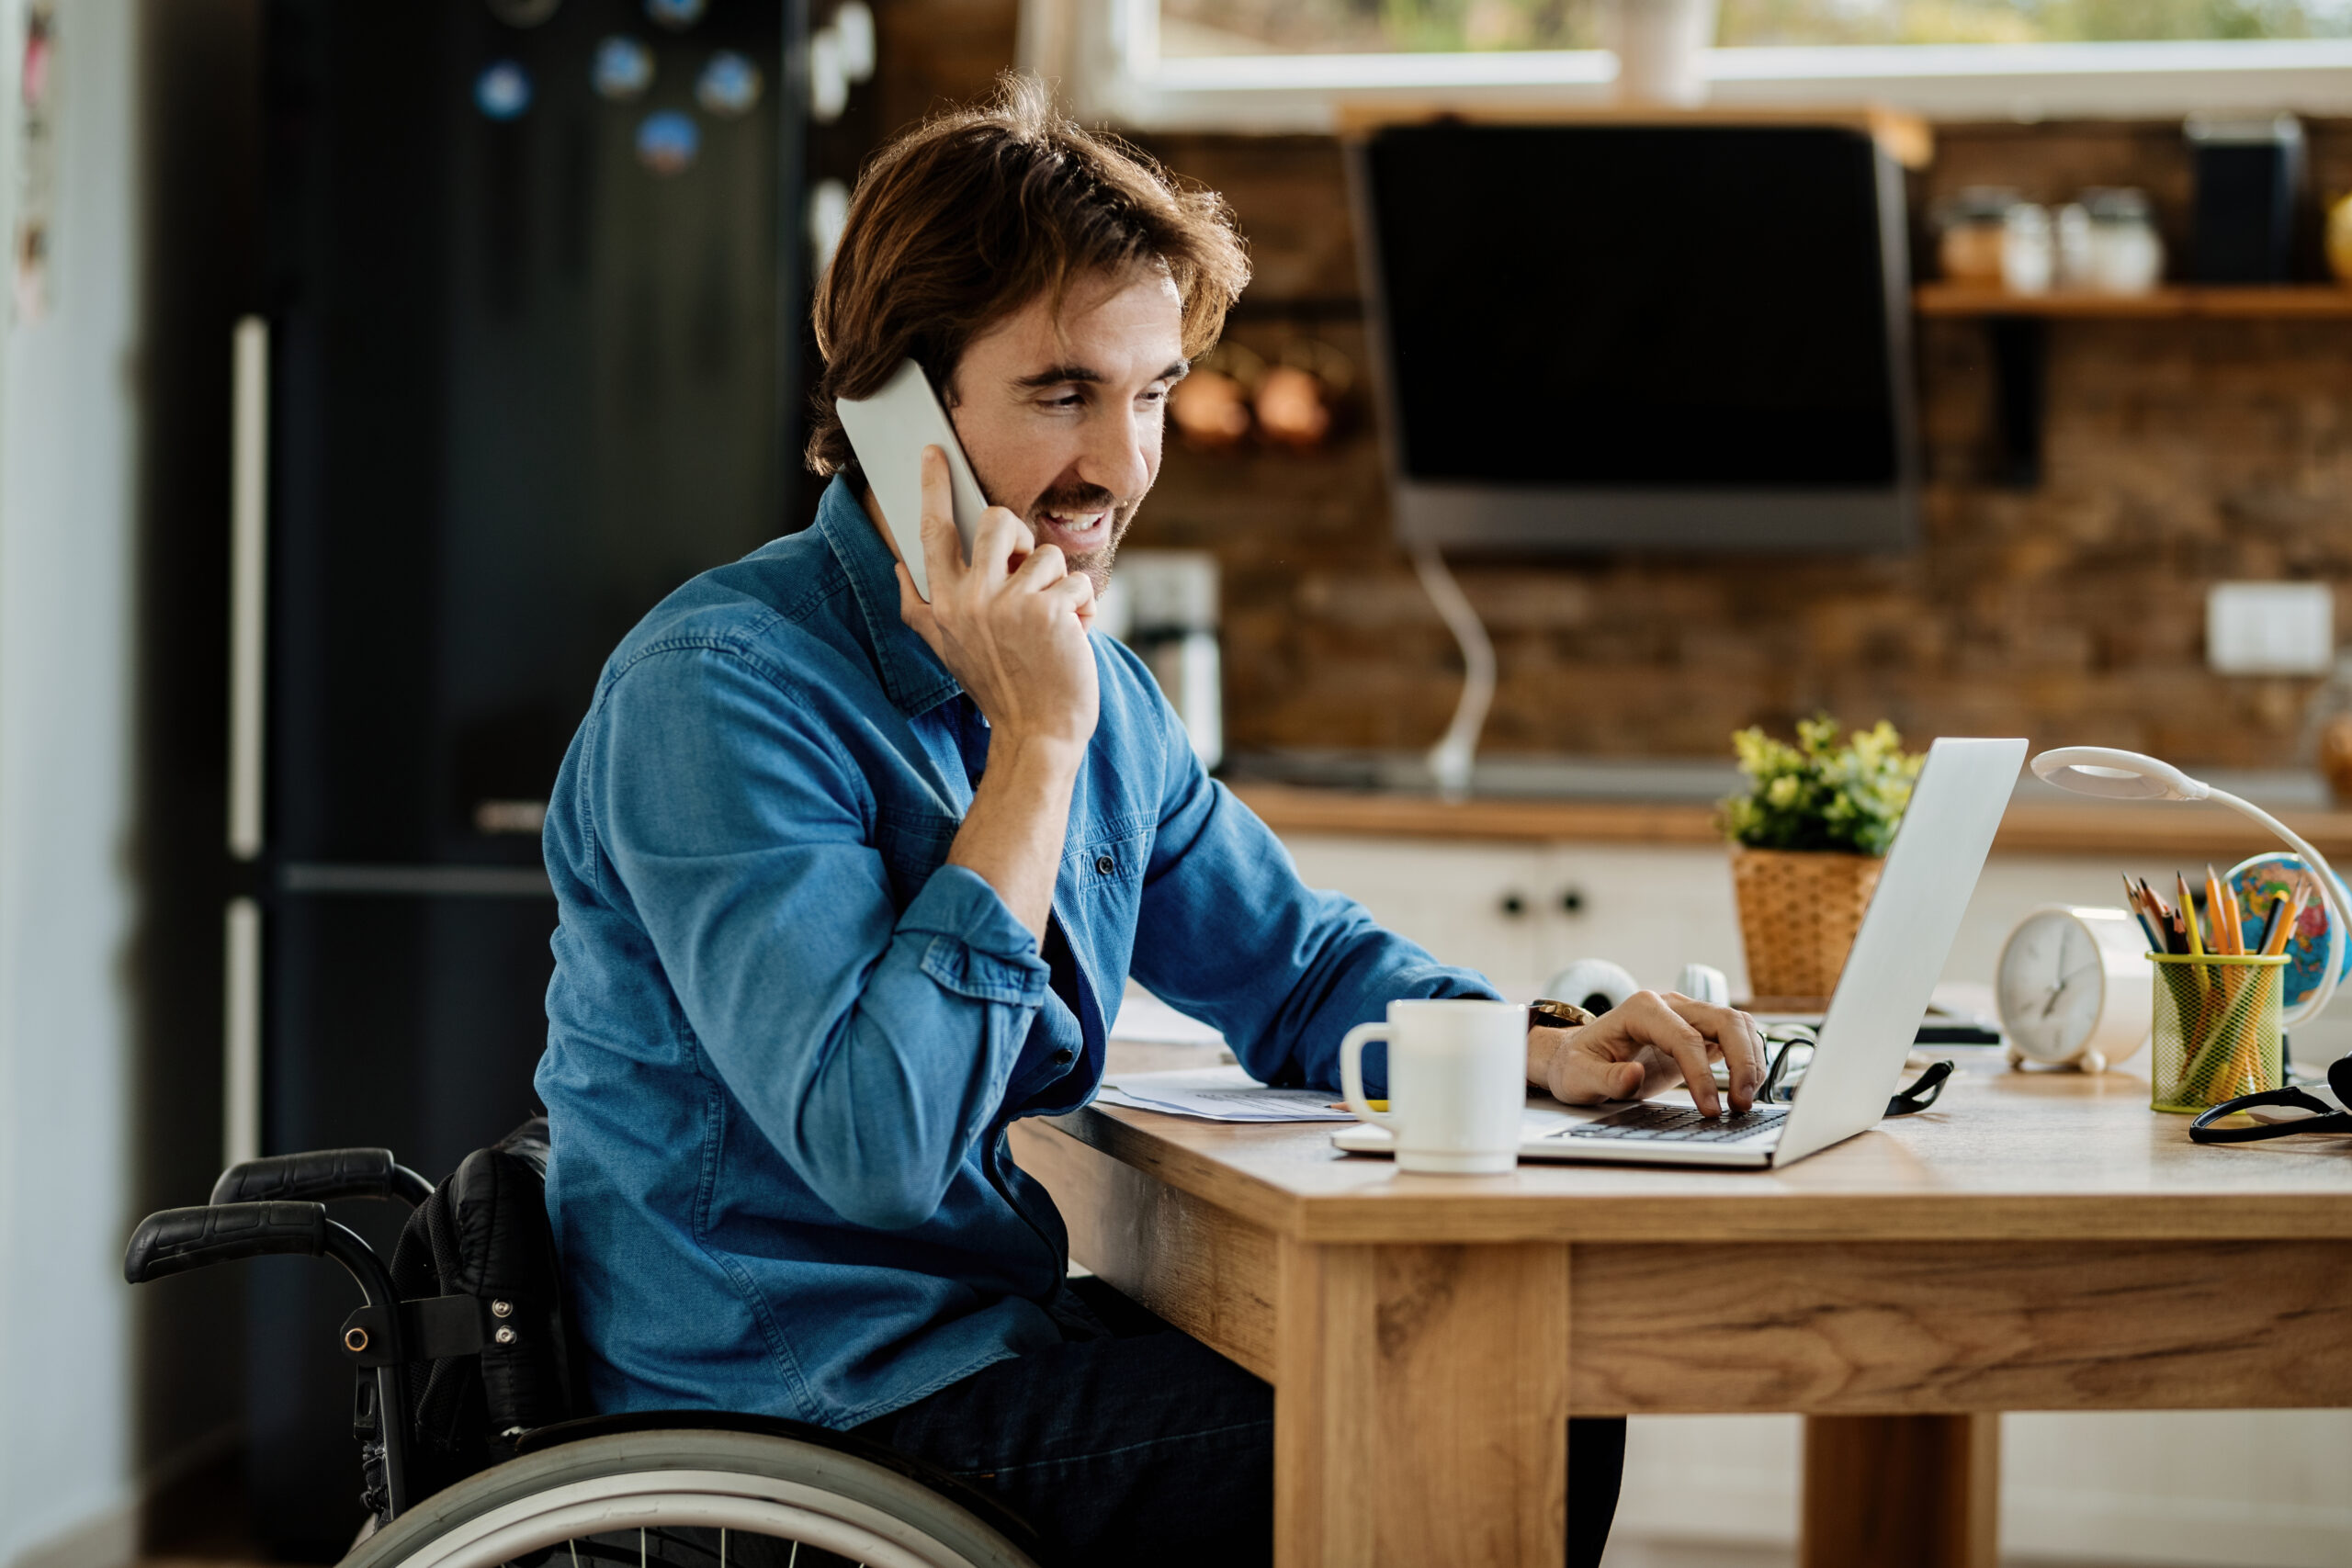 If you've been left with a spinal cord injury after a bad accident, a California lawyer can help you get the financial support you need to recover from or manage your condition.